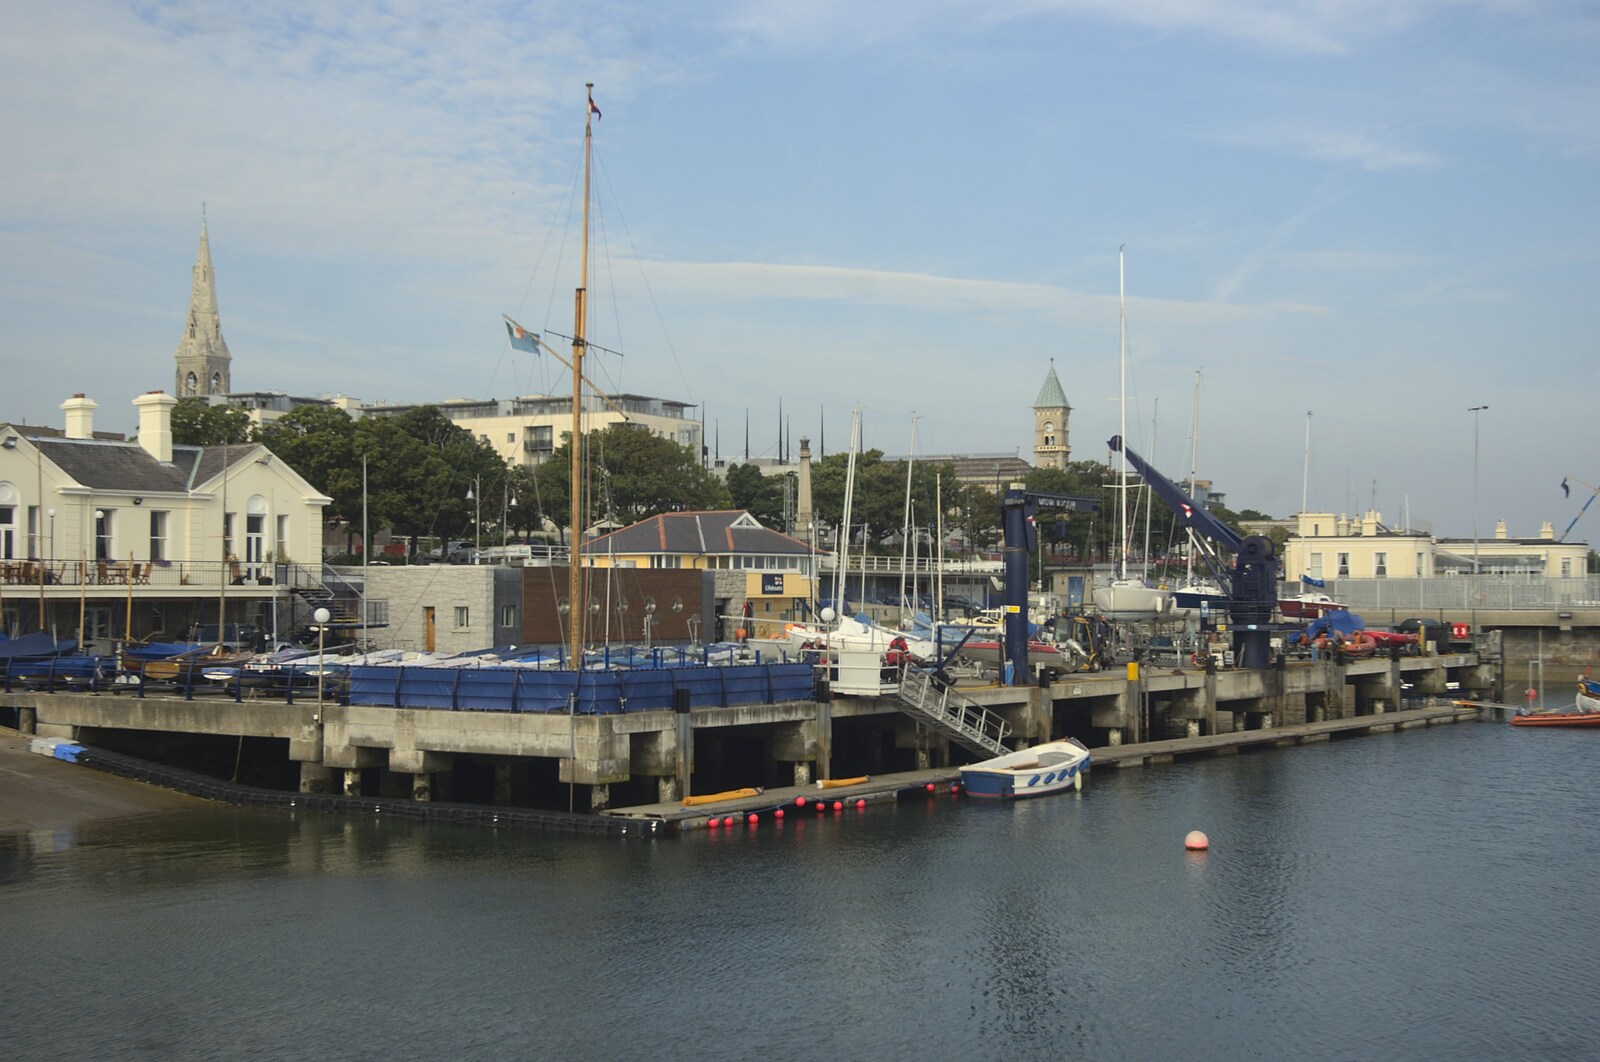 A Day in Dun Laoghaire, County Dublin, Ireland - 3rd September 2010: The yacht club at Dun Laoghaire